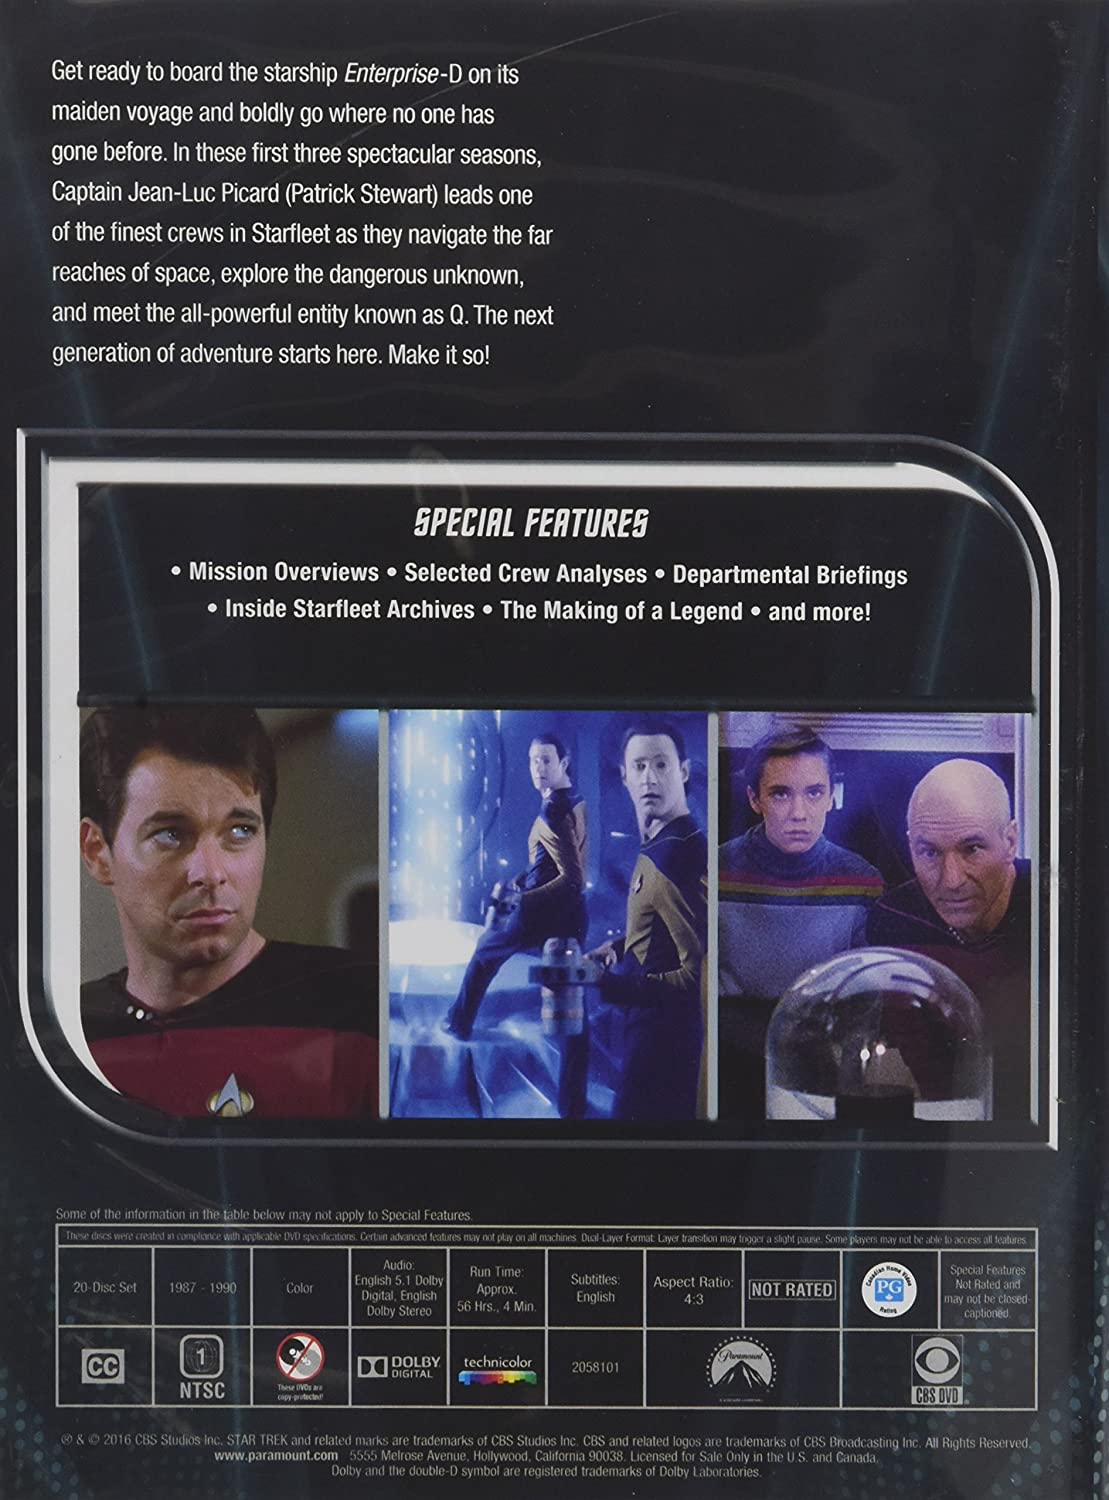 Star Trek The Next Generation: The Complete Series (DVD) - image 5 of 8